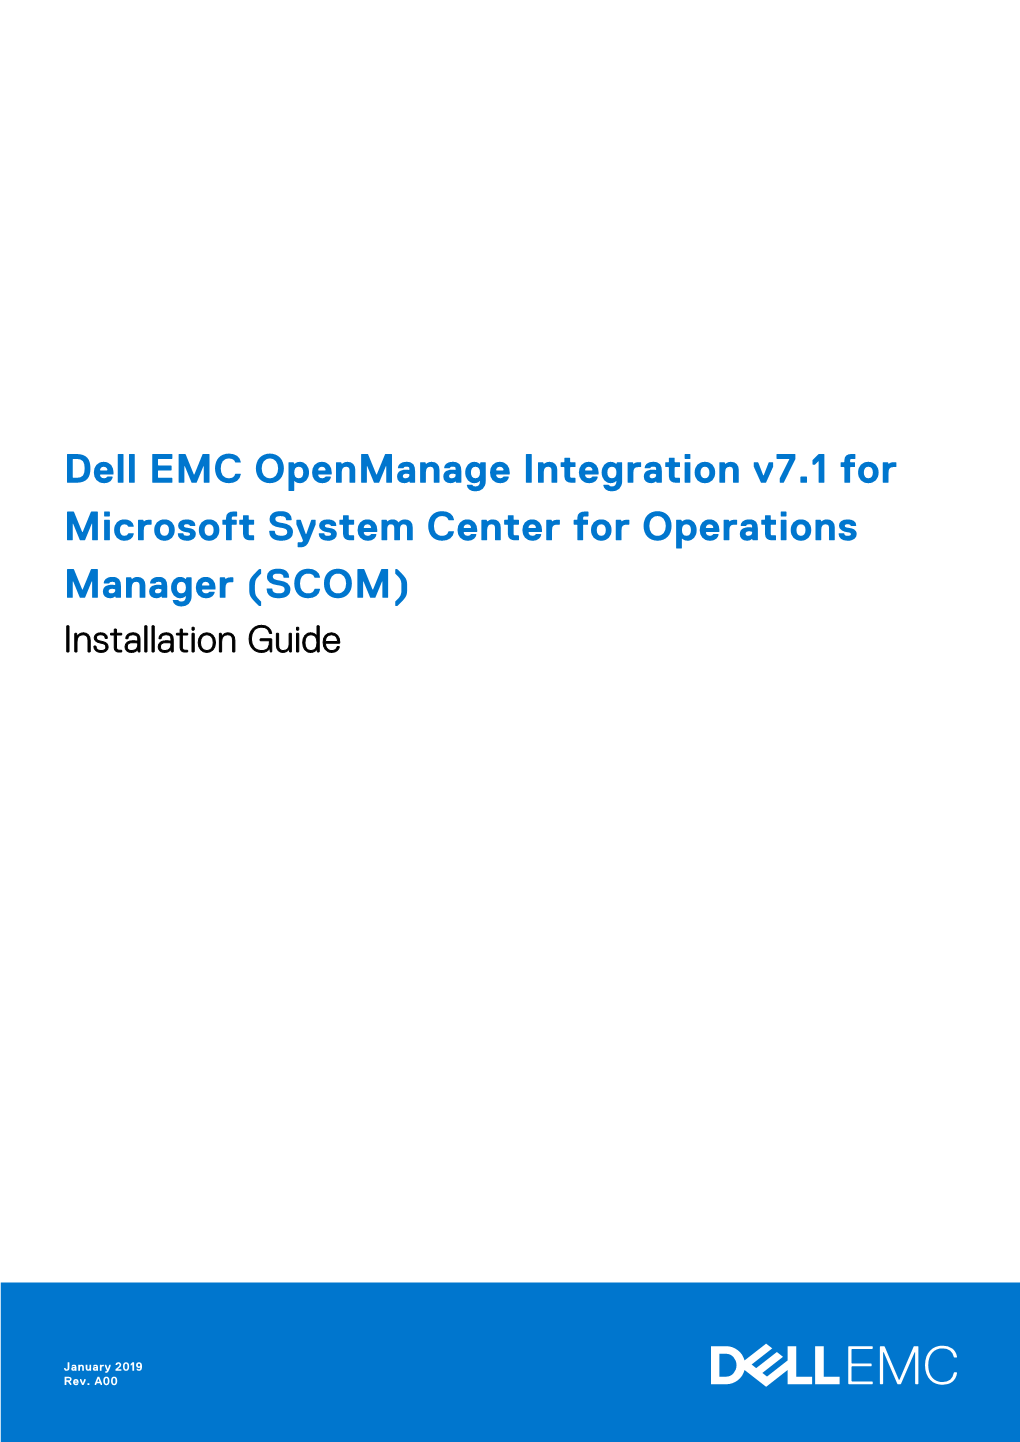 Dell EMC Openmanage Integration V7.1 for Microsoft System Center for Operations Manager (SCOM) Installation Guide